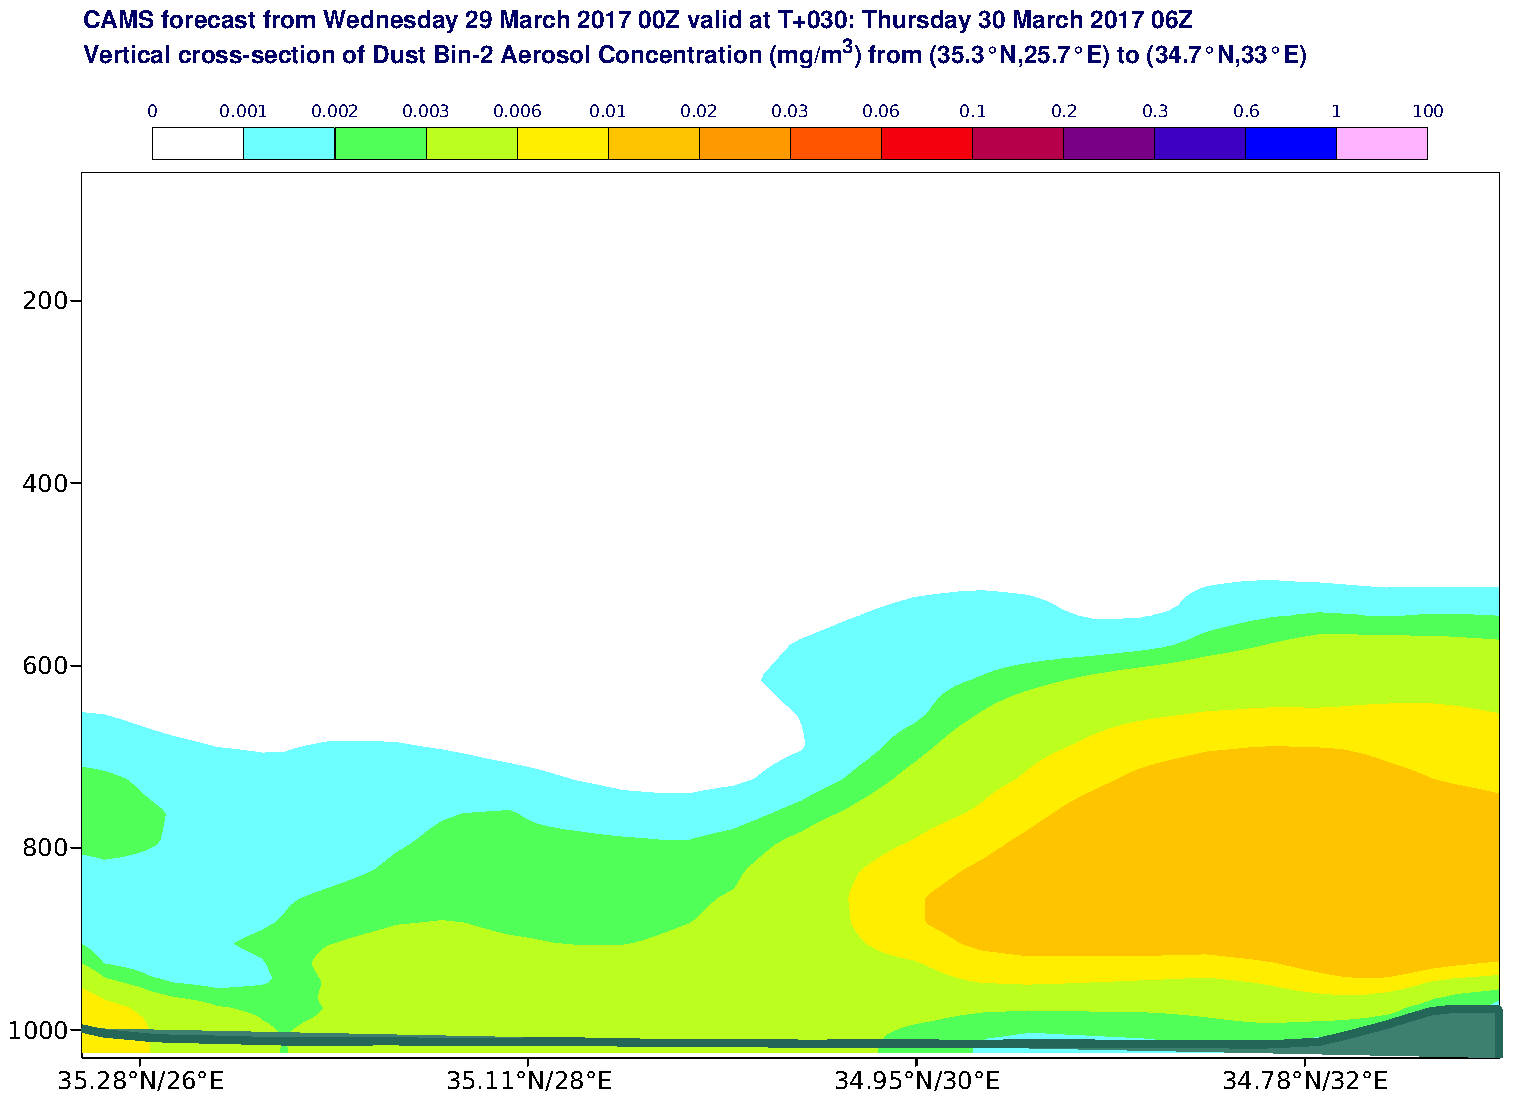 Vertical cross-section of Dust Bin-2 Aerosol Concentration (mg/m3) valid at T30 - 2017-03-30 06:00